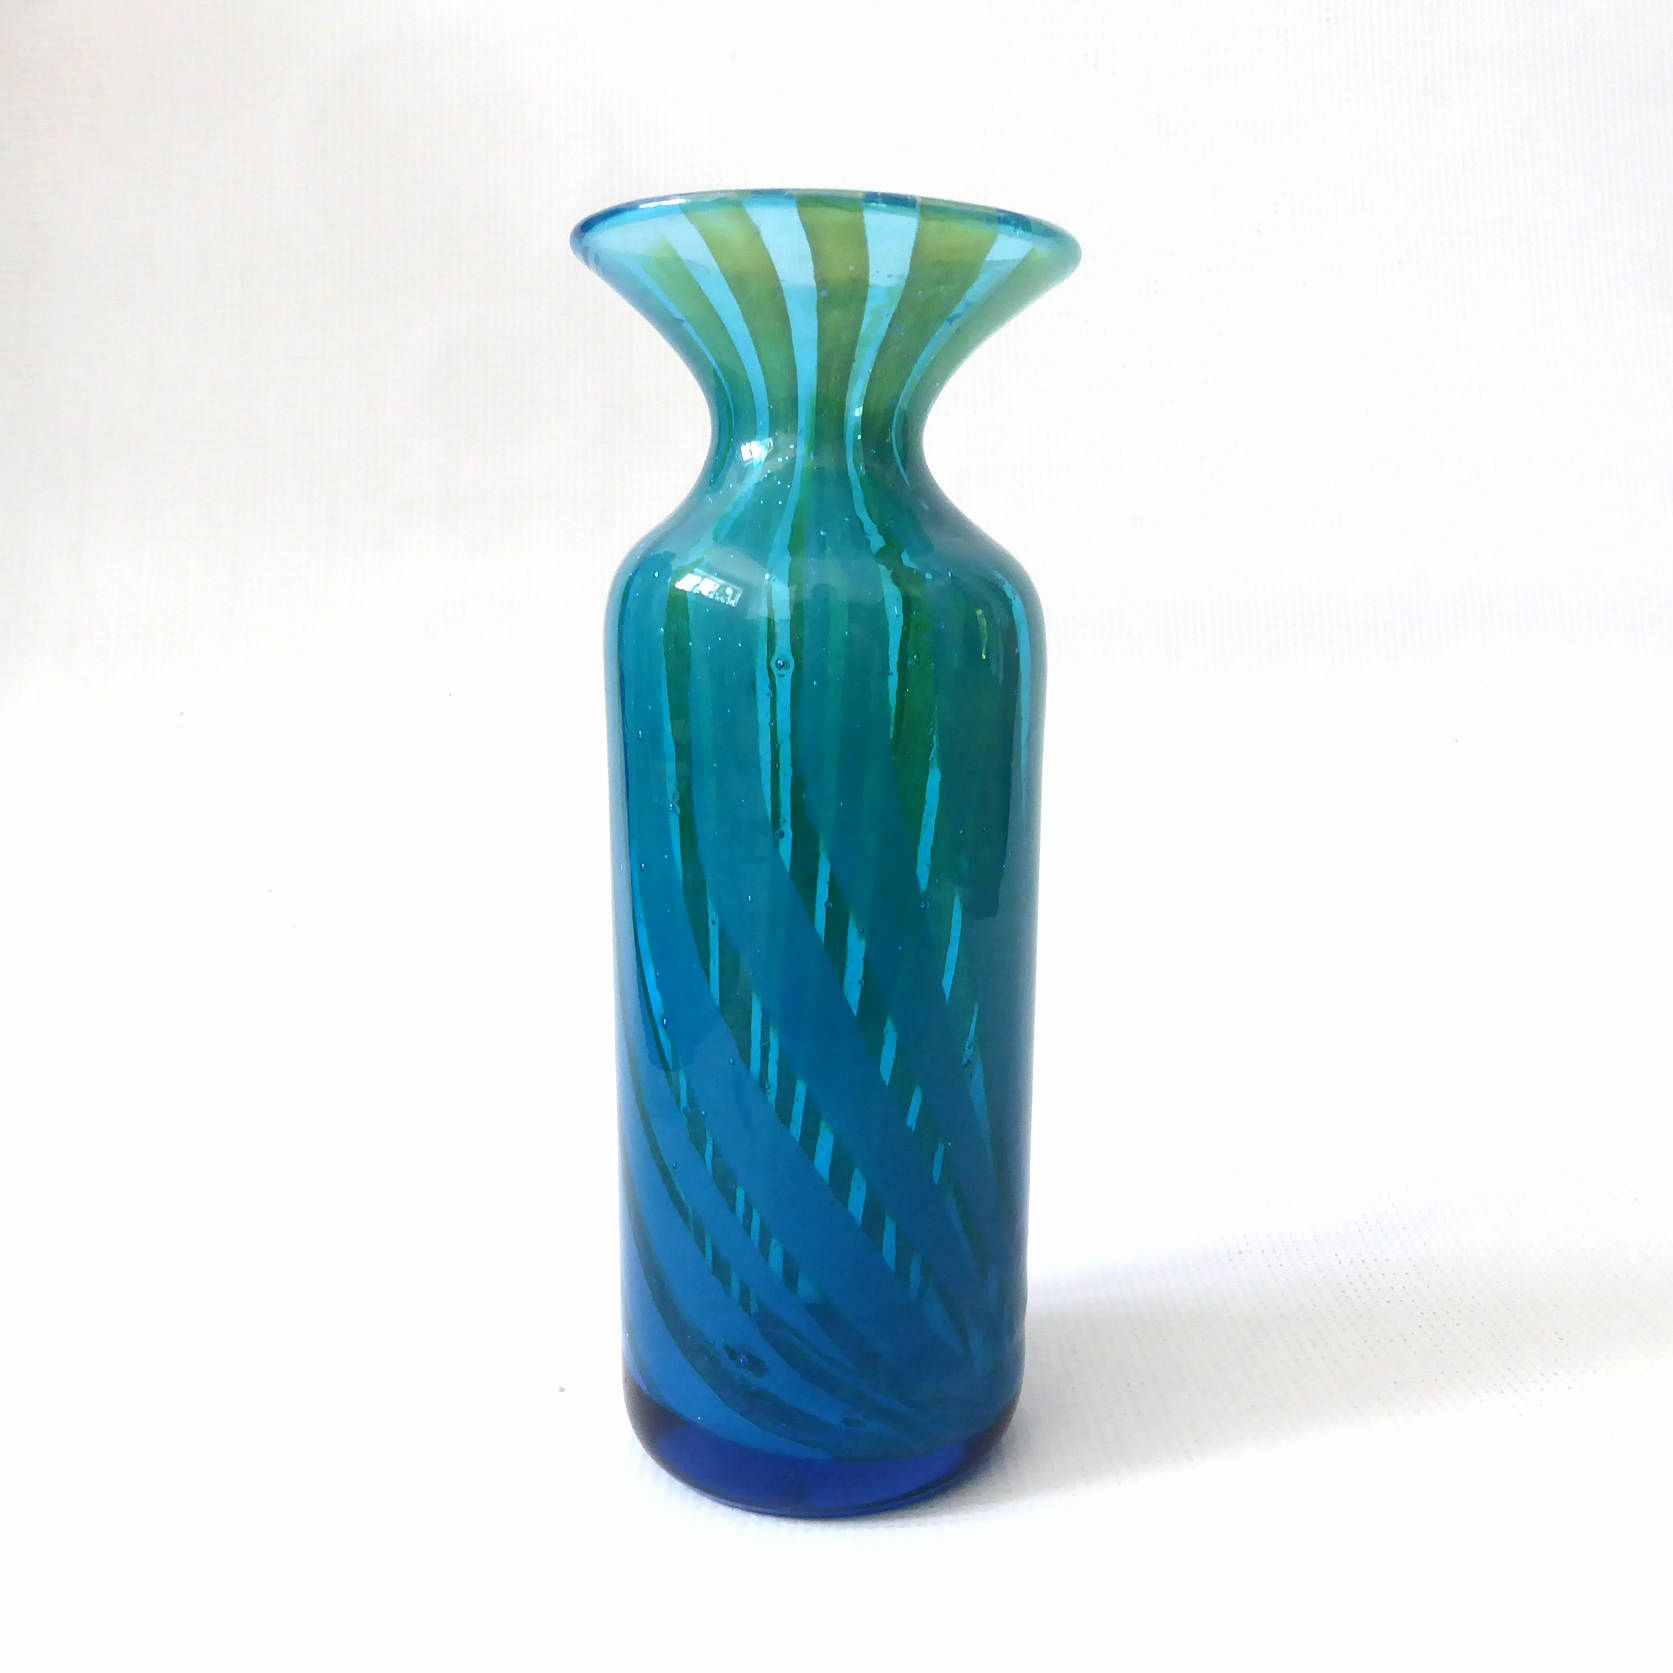 16 Famous Green Glass Bottle Vase 2023 free download green glass bottle vase of 35 antique green glass vases the weekly world intended for antique glass vases identify vase and cellar image avorcor